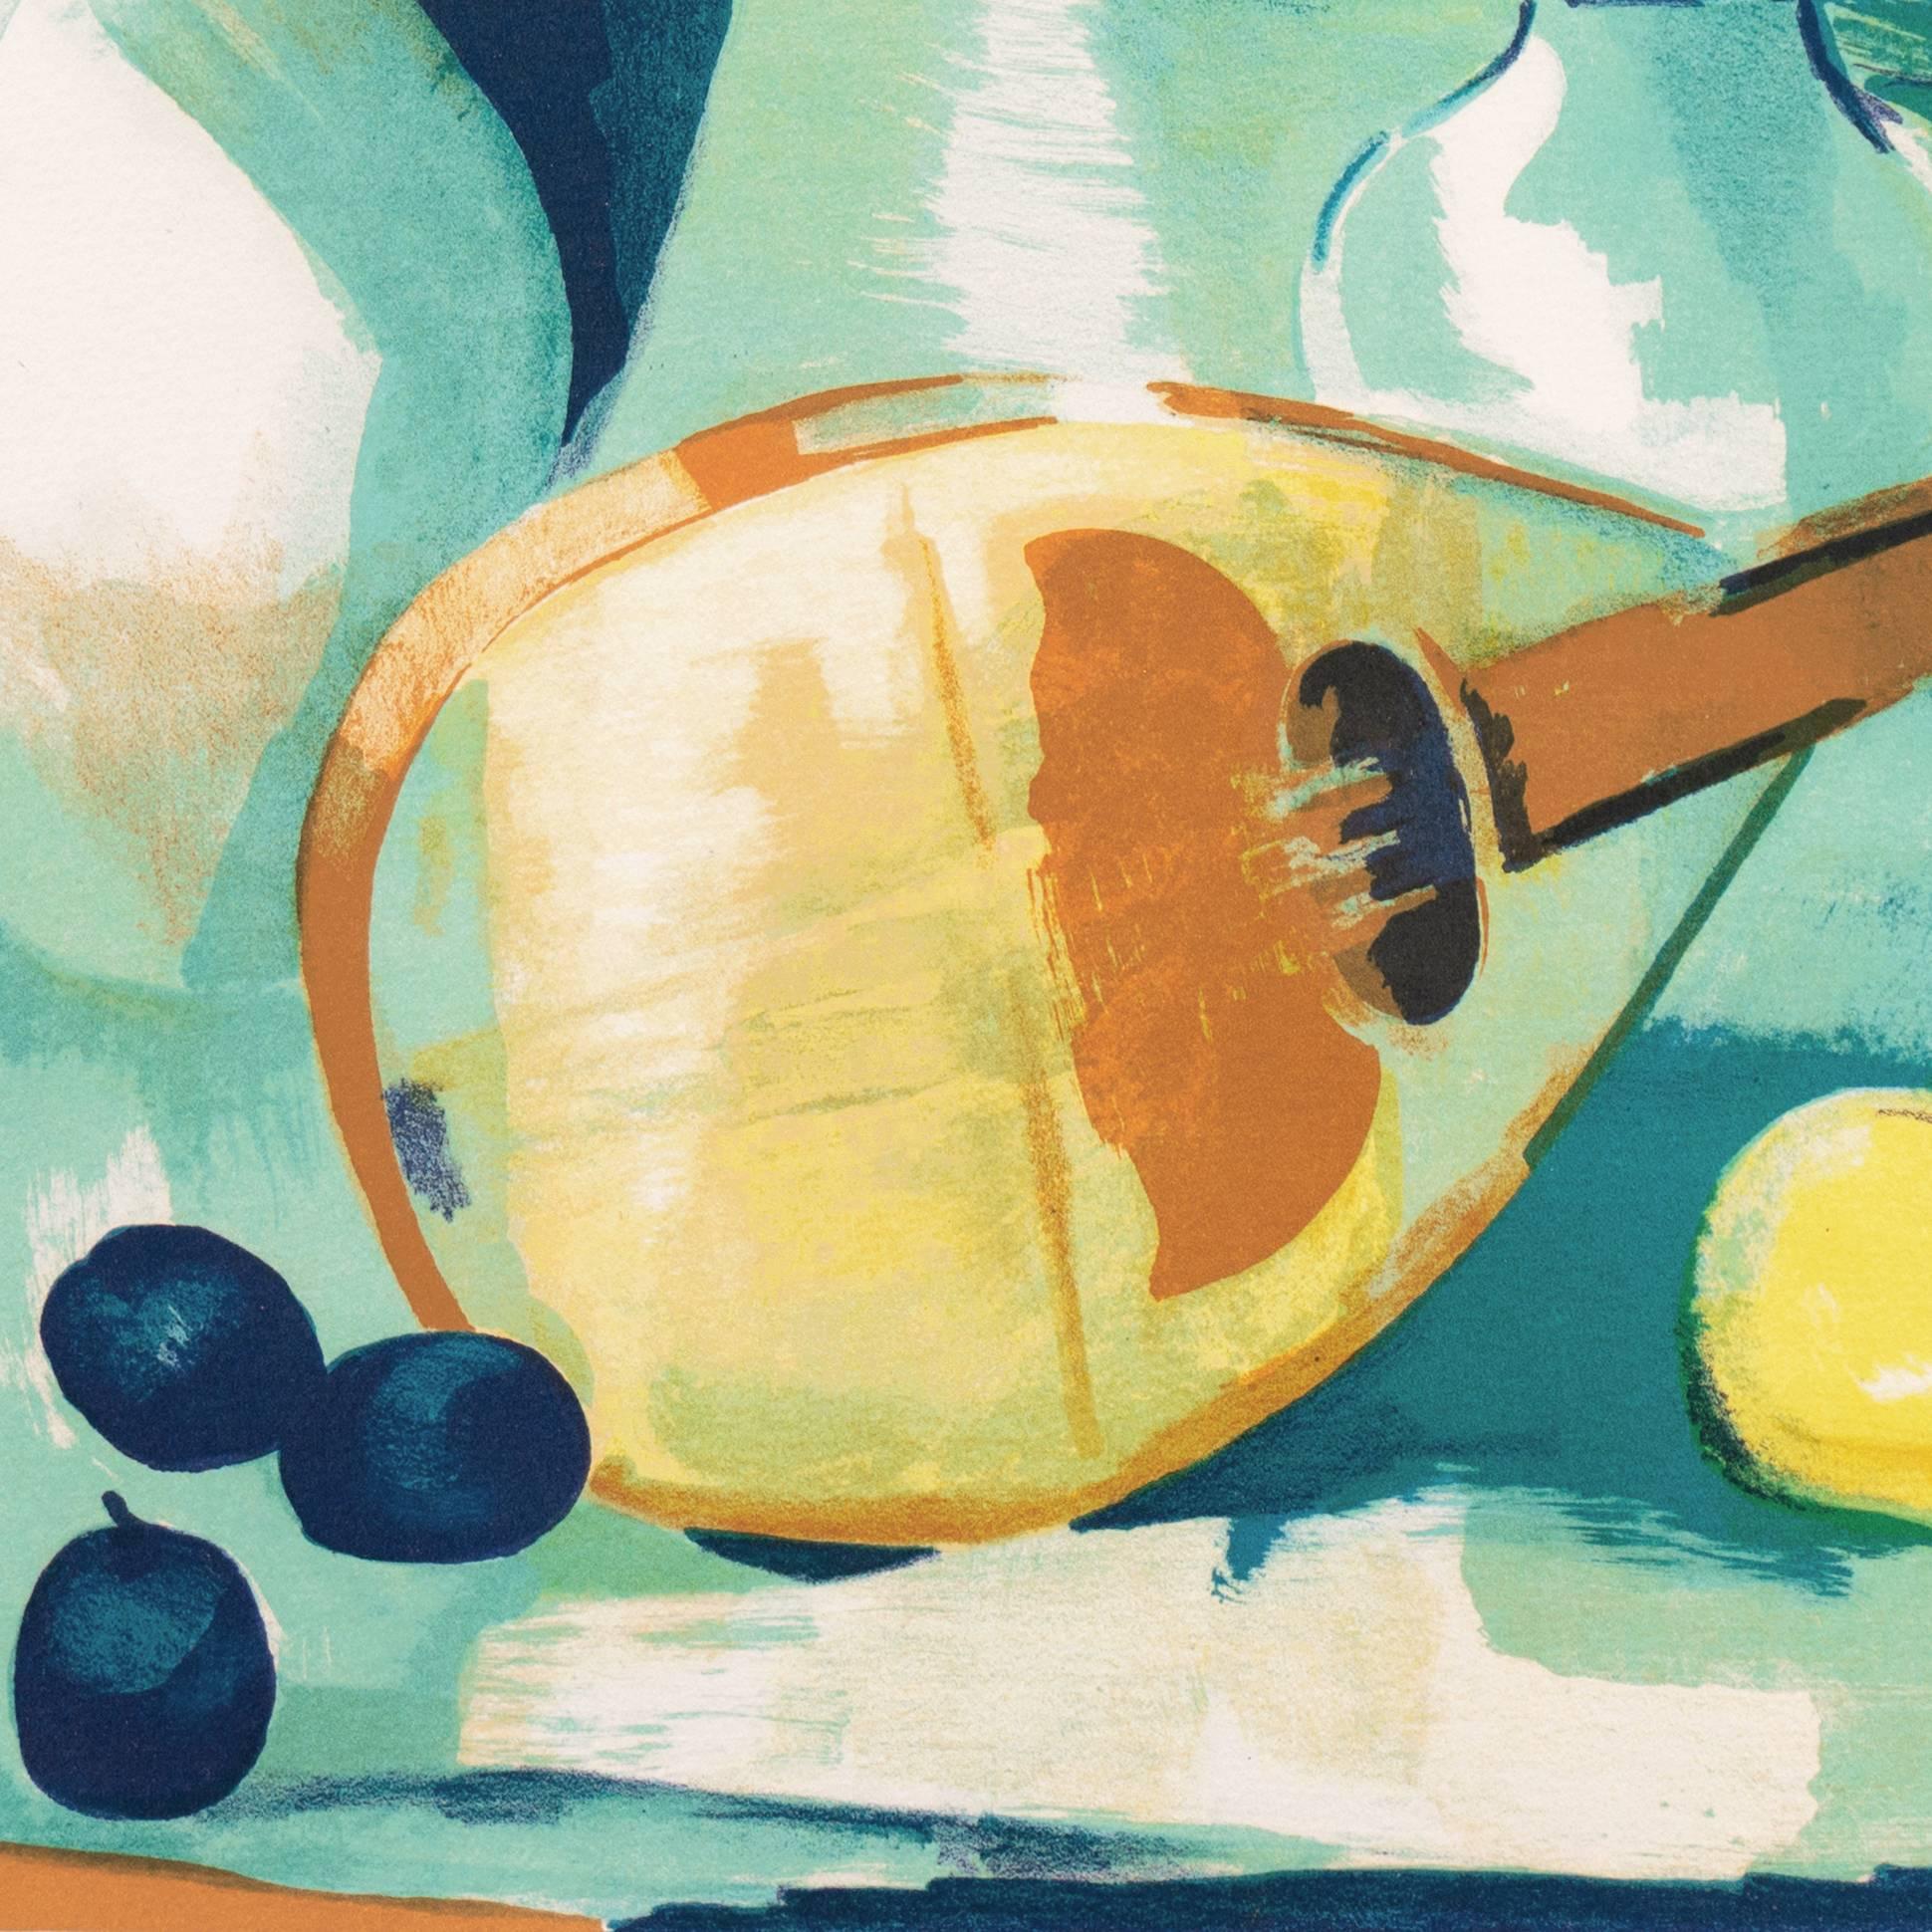 Inscribed lower right, 'Gerard Langlet' (French, born 1906) and with limited edition number and limitation '128/375' lower right. 

A substantial, stone lithograph still-life showing a view of a mandolin laying on a table beside a white ceramic jug